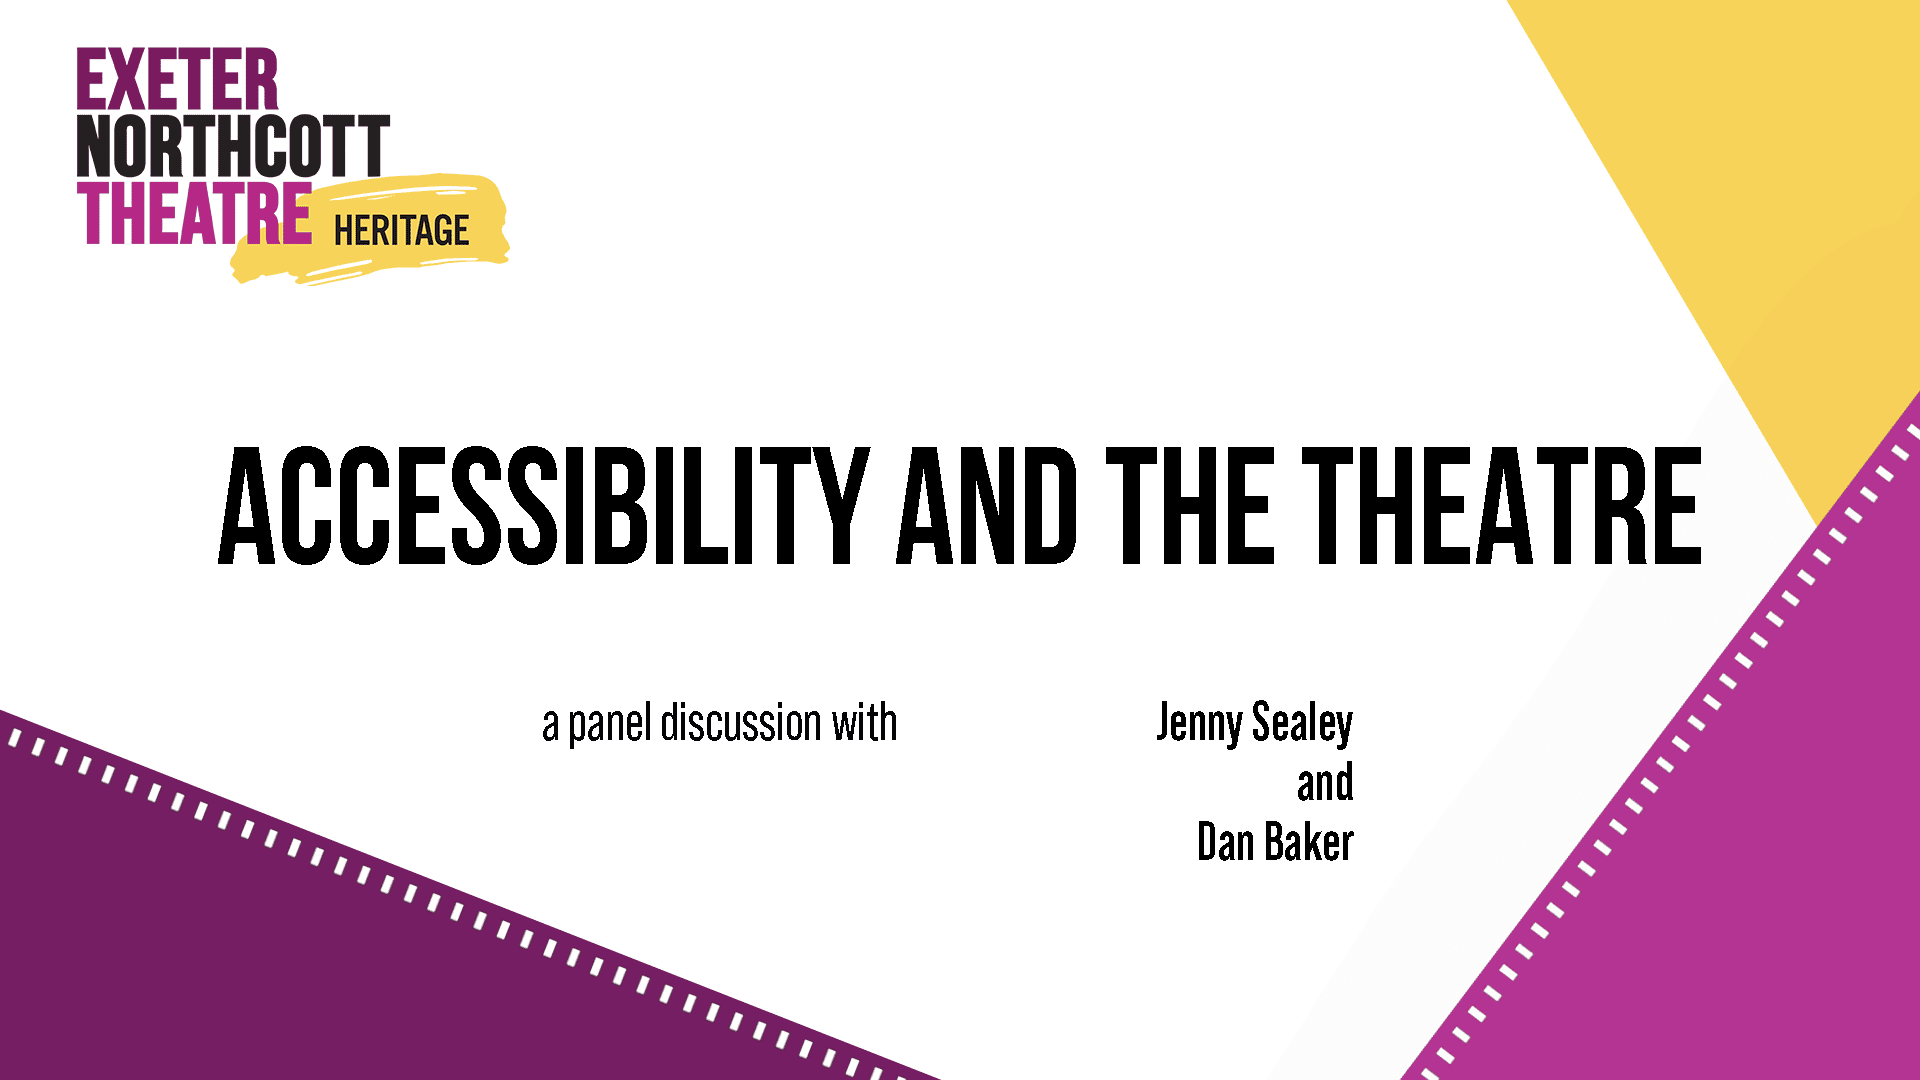 Heritage Talk: Accessibility and the Theatre